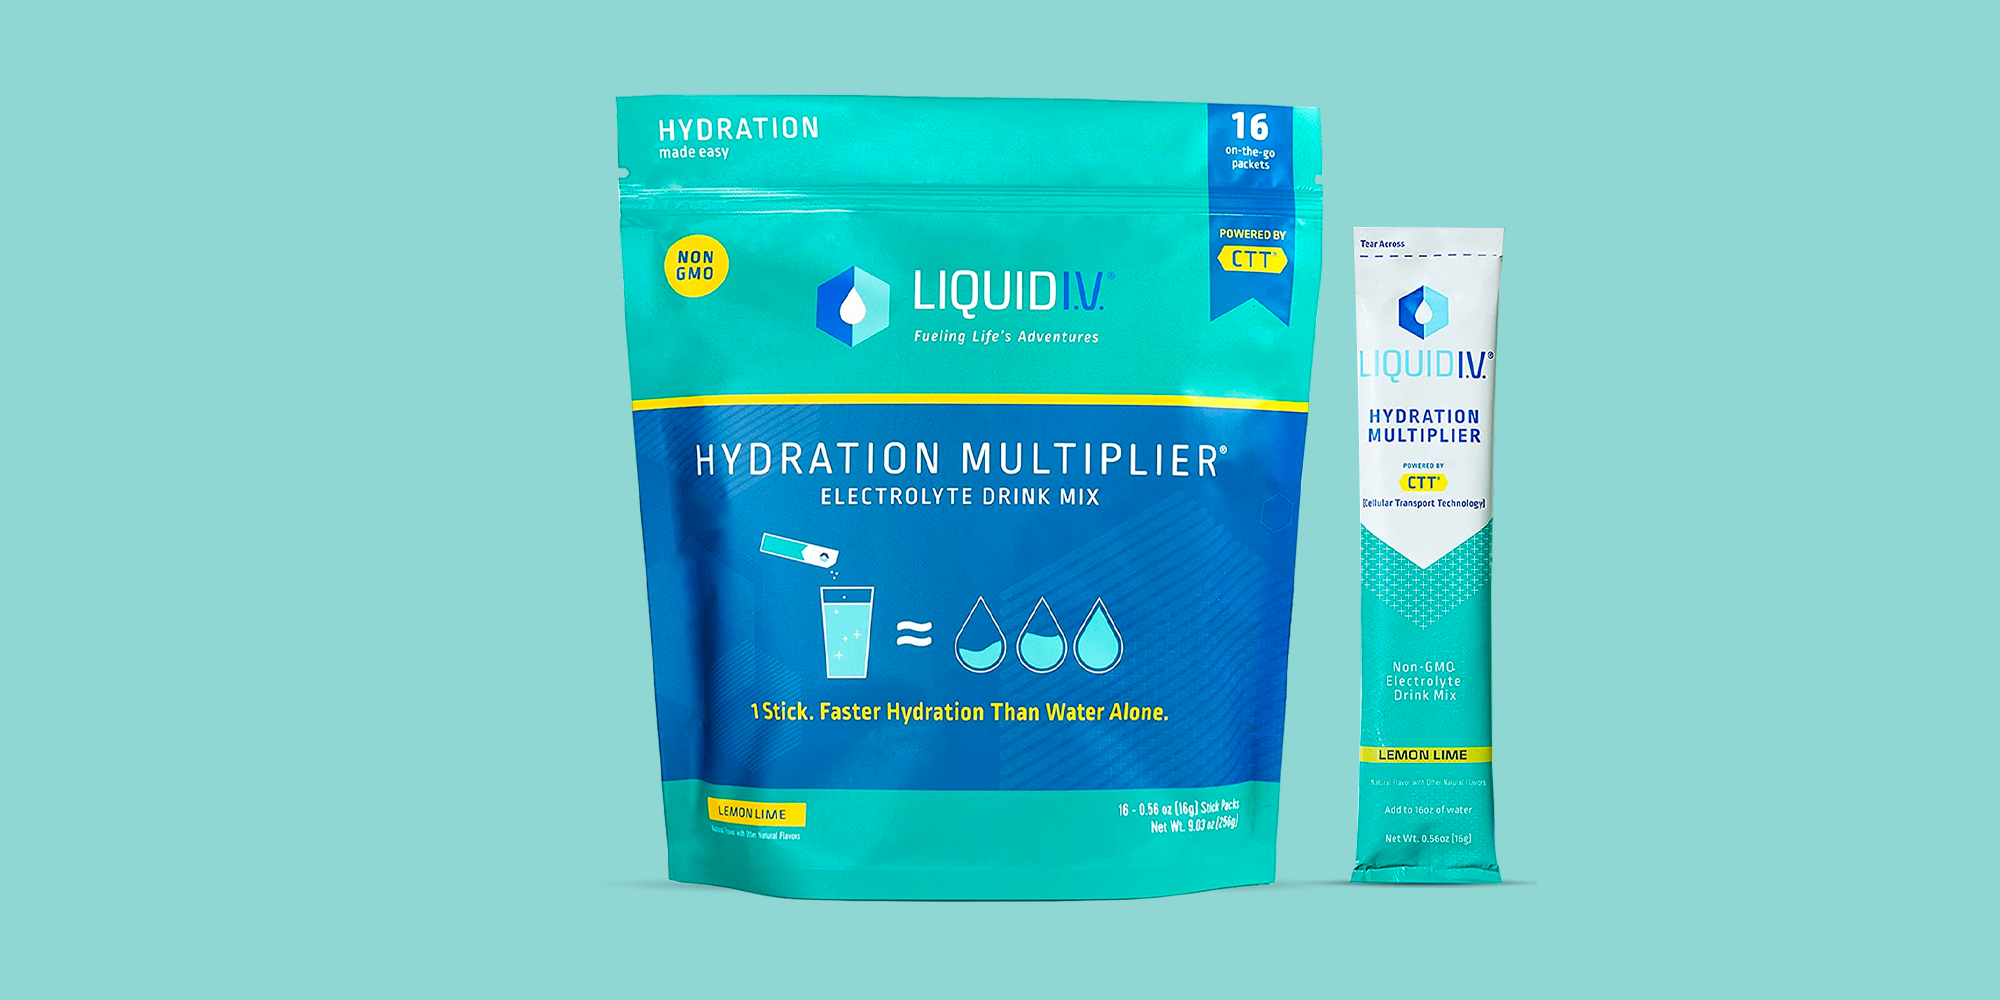 Wellness Brand Liquid I.V. Launches An Exclusive Yummy Hydration  Multiplier Flavor, Inspired By The Platinum Selling Hit Song